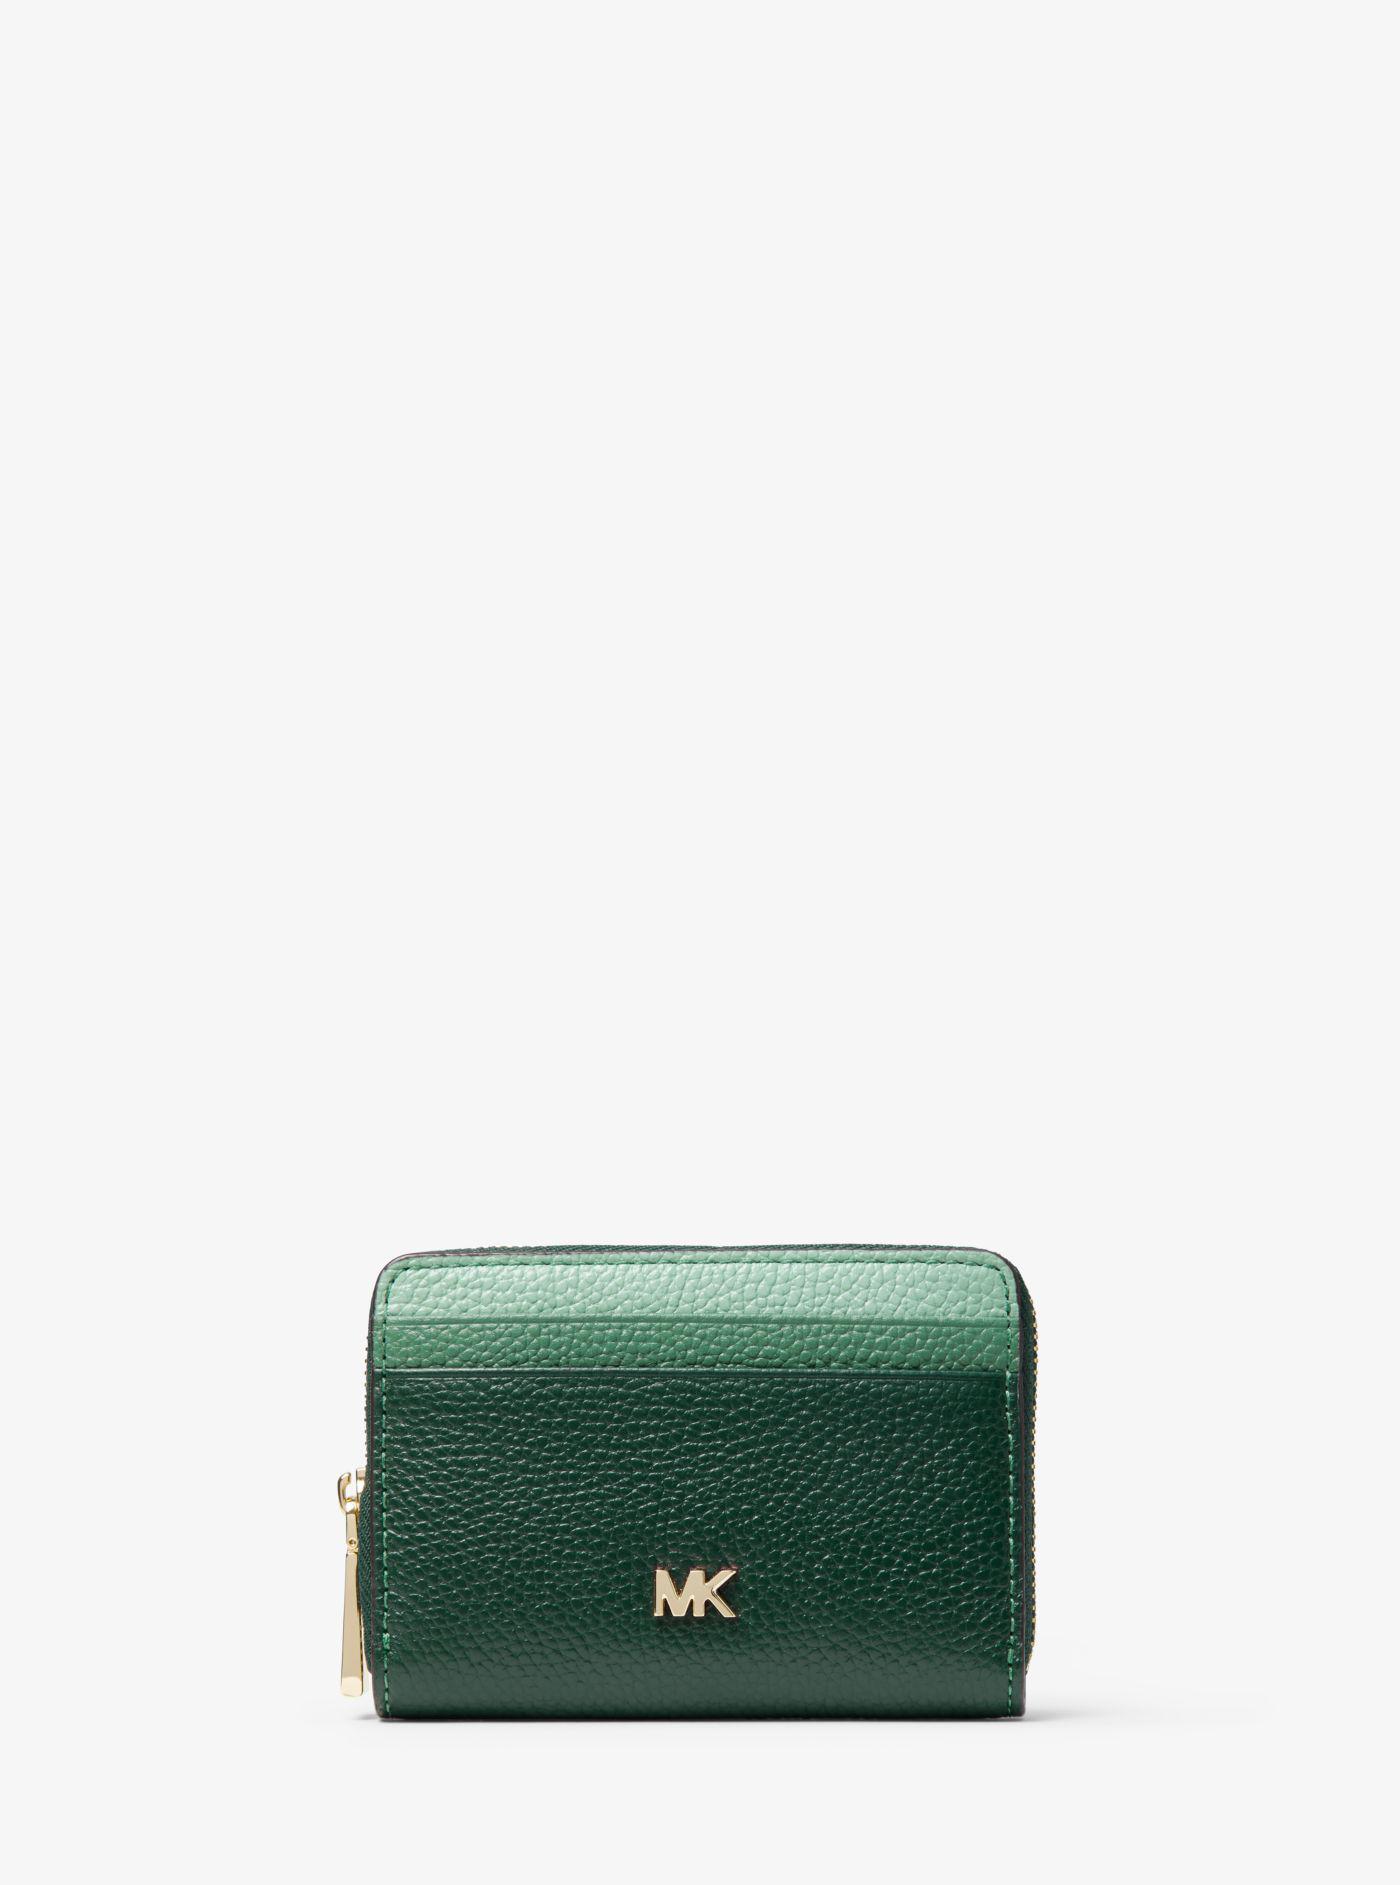 michael kors small pebbled leather wallet